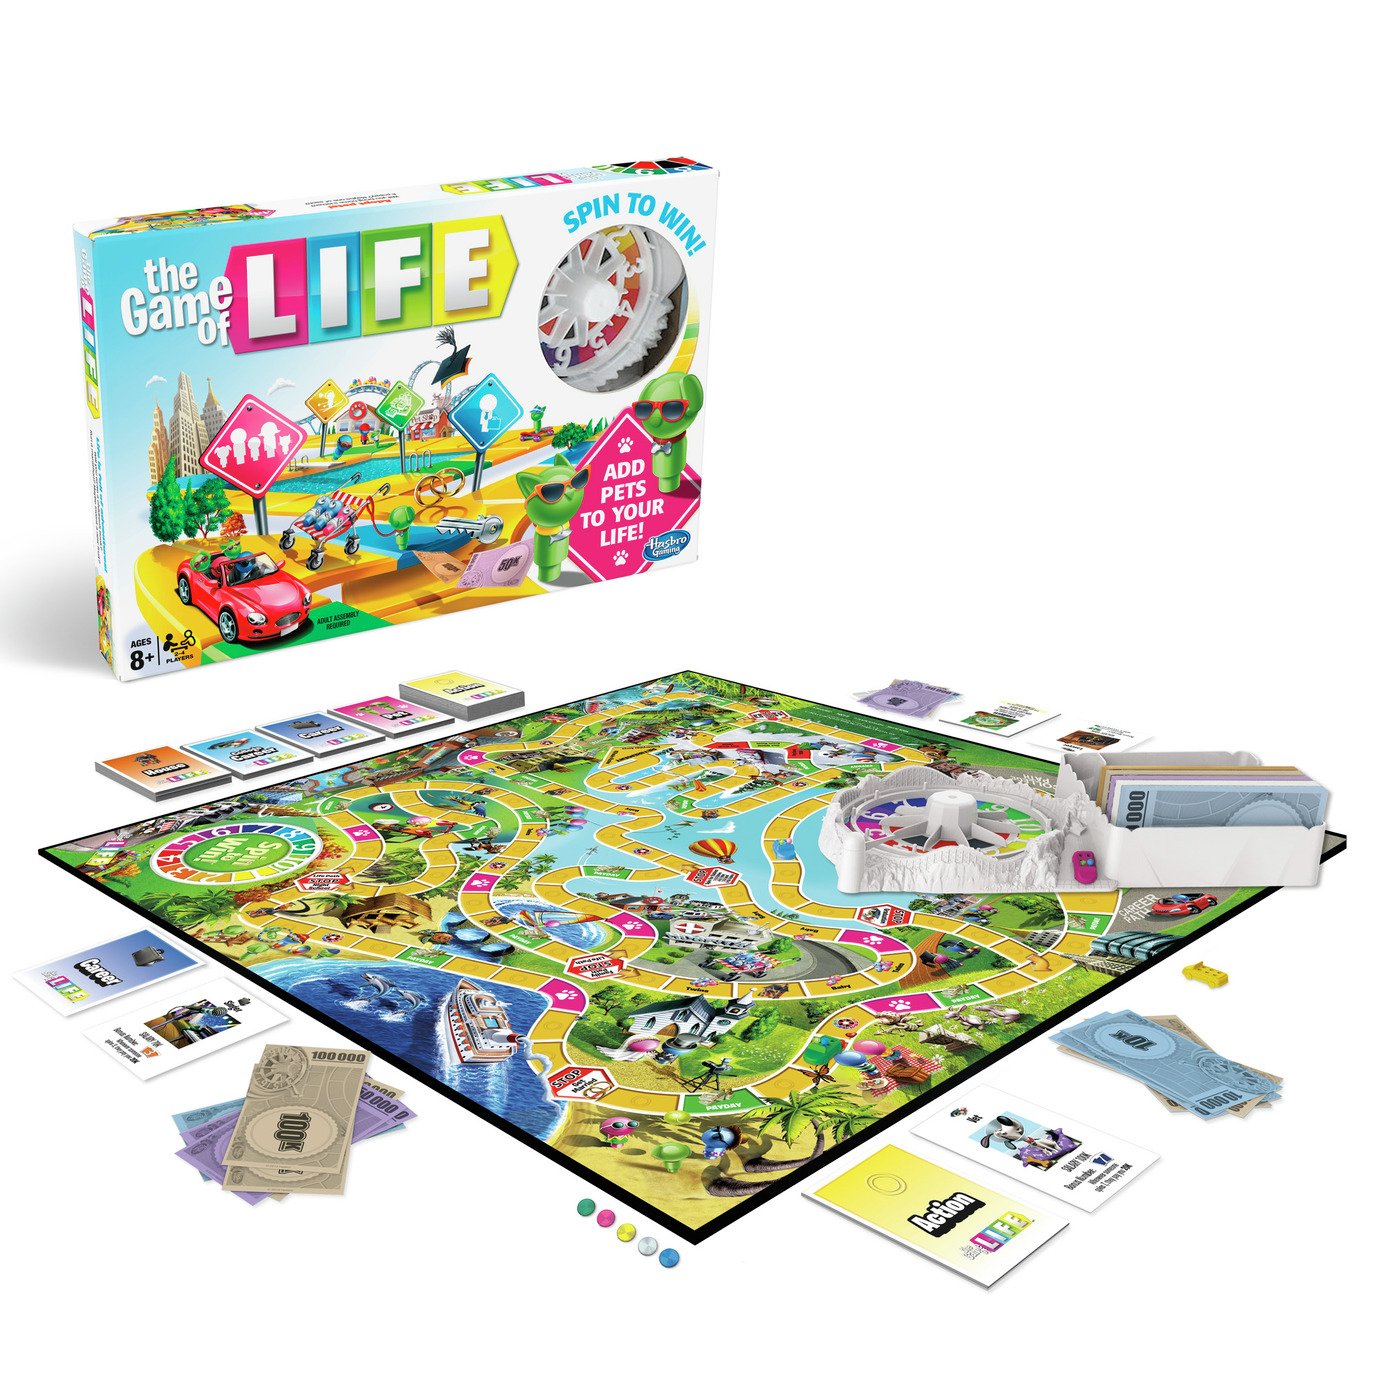 The Game of Life from Hasbro Gaming Review